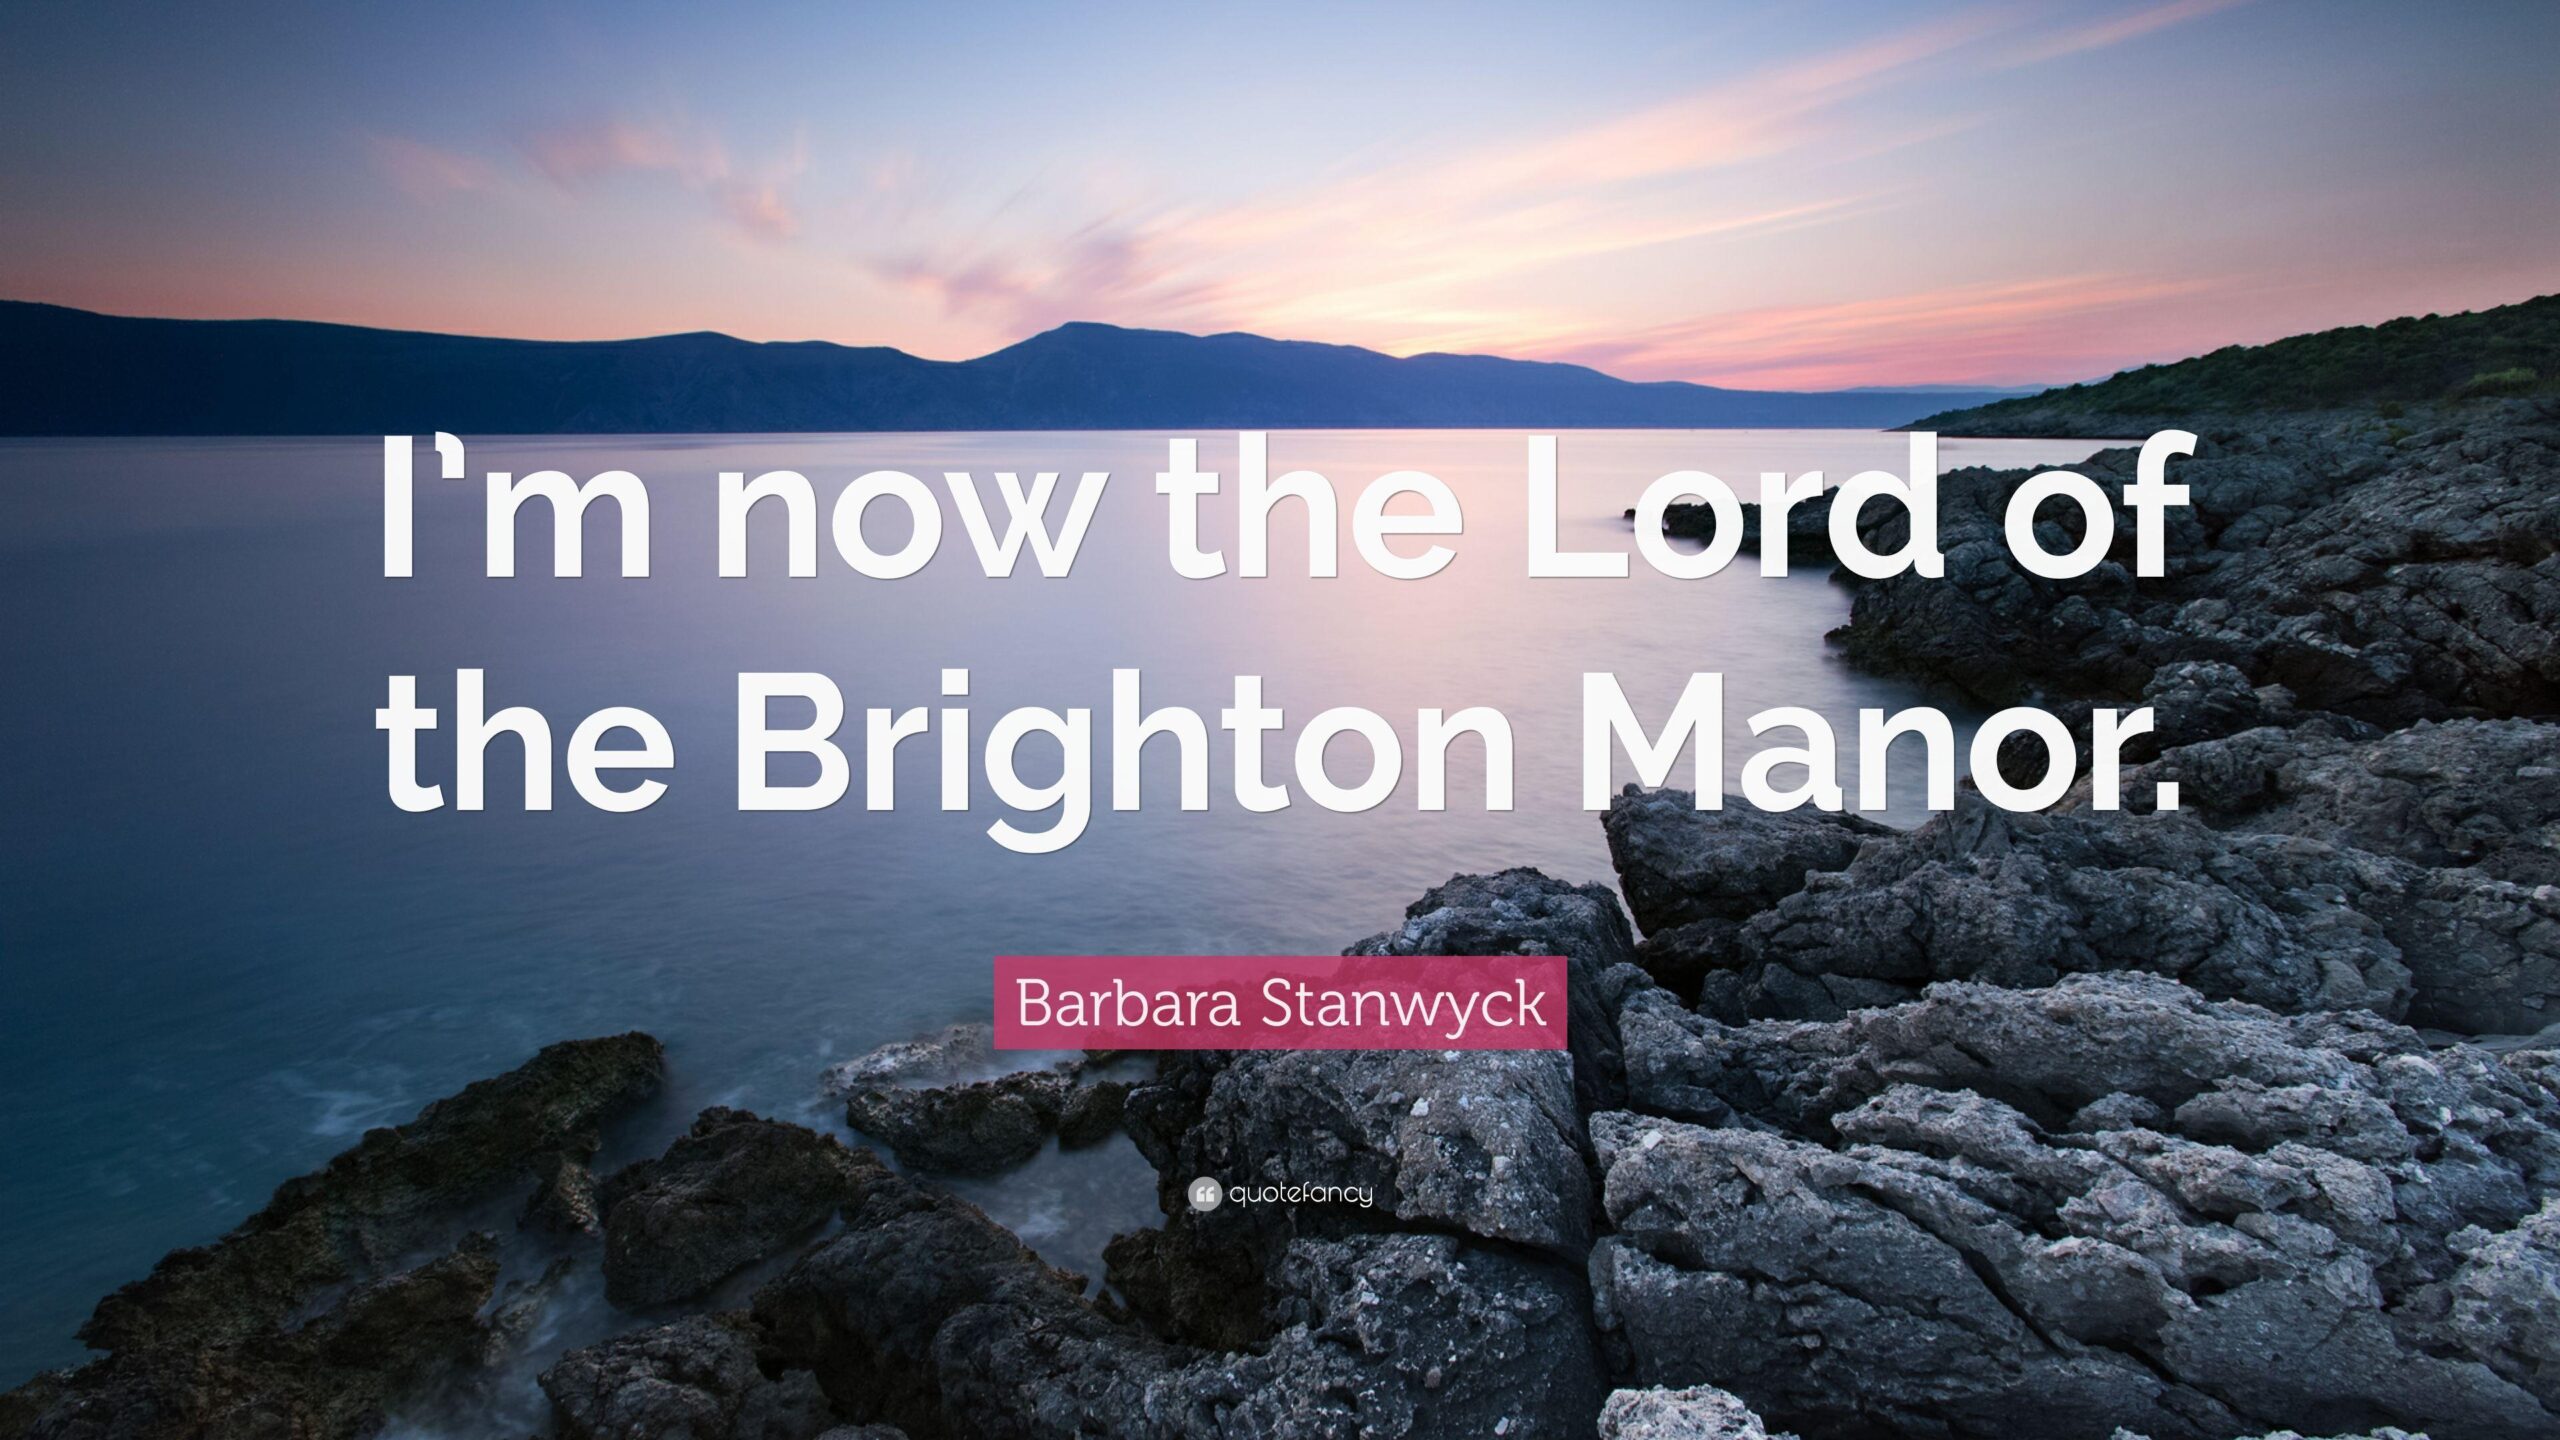 Barbara Stanwyck Quote “I’m now the Lord of the Brighton Manor”